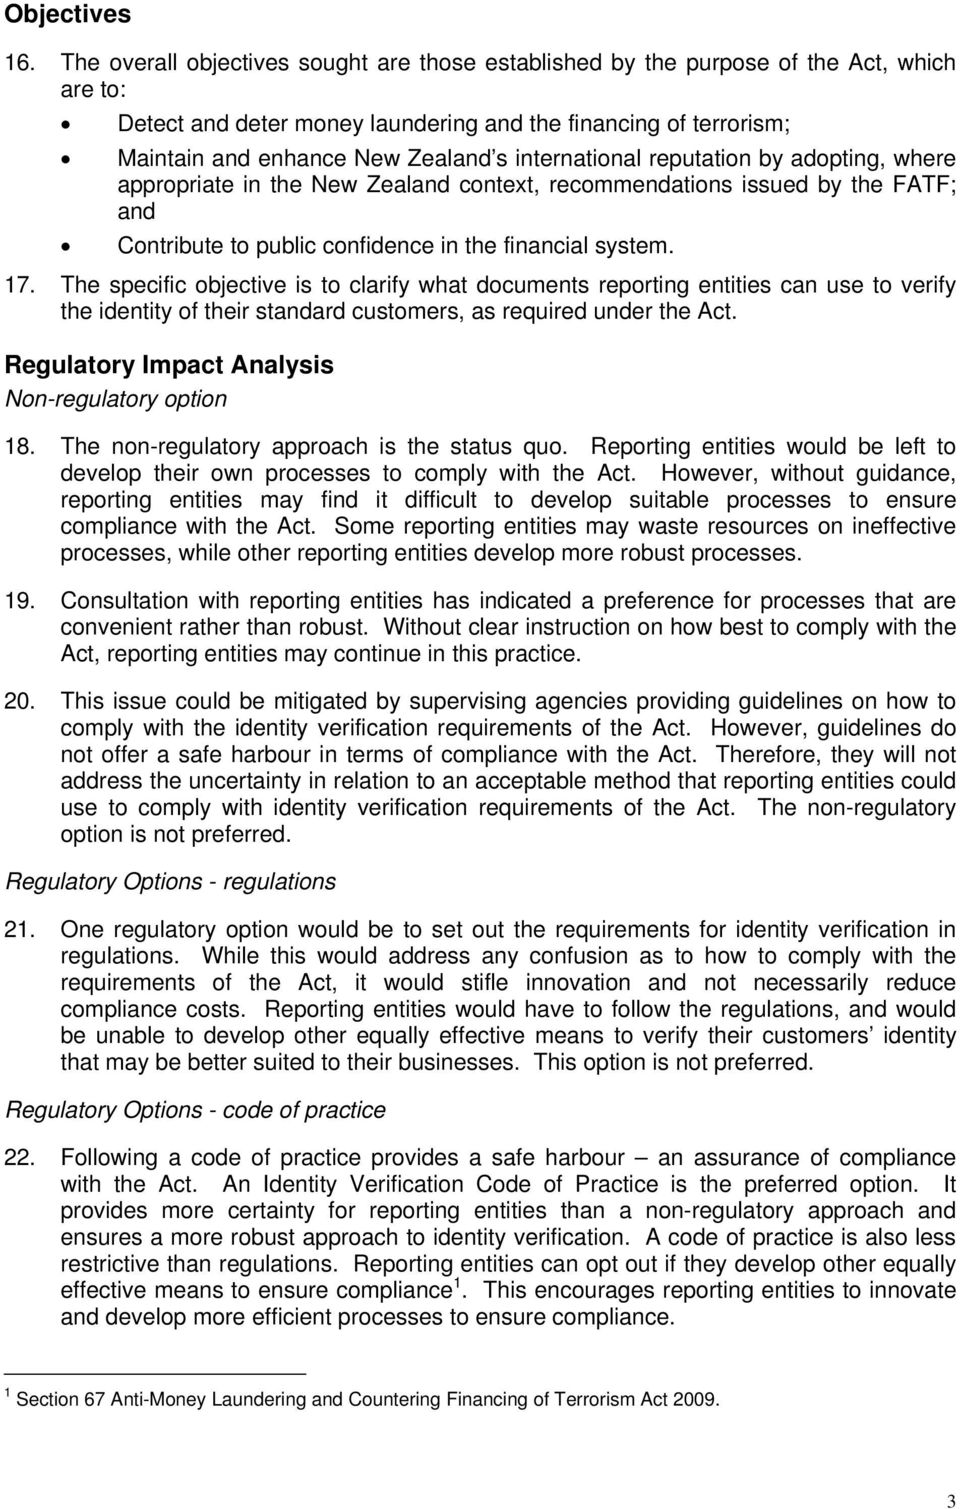 international reputation by adopting, where appropriate in the New Zealand context, recommendations issued by the FATF; and Contribute to public confidence in the financial system. 17.